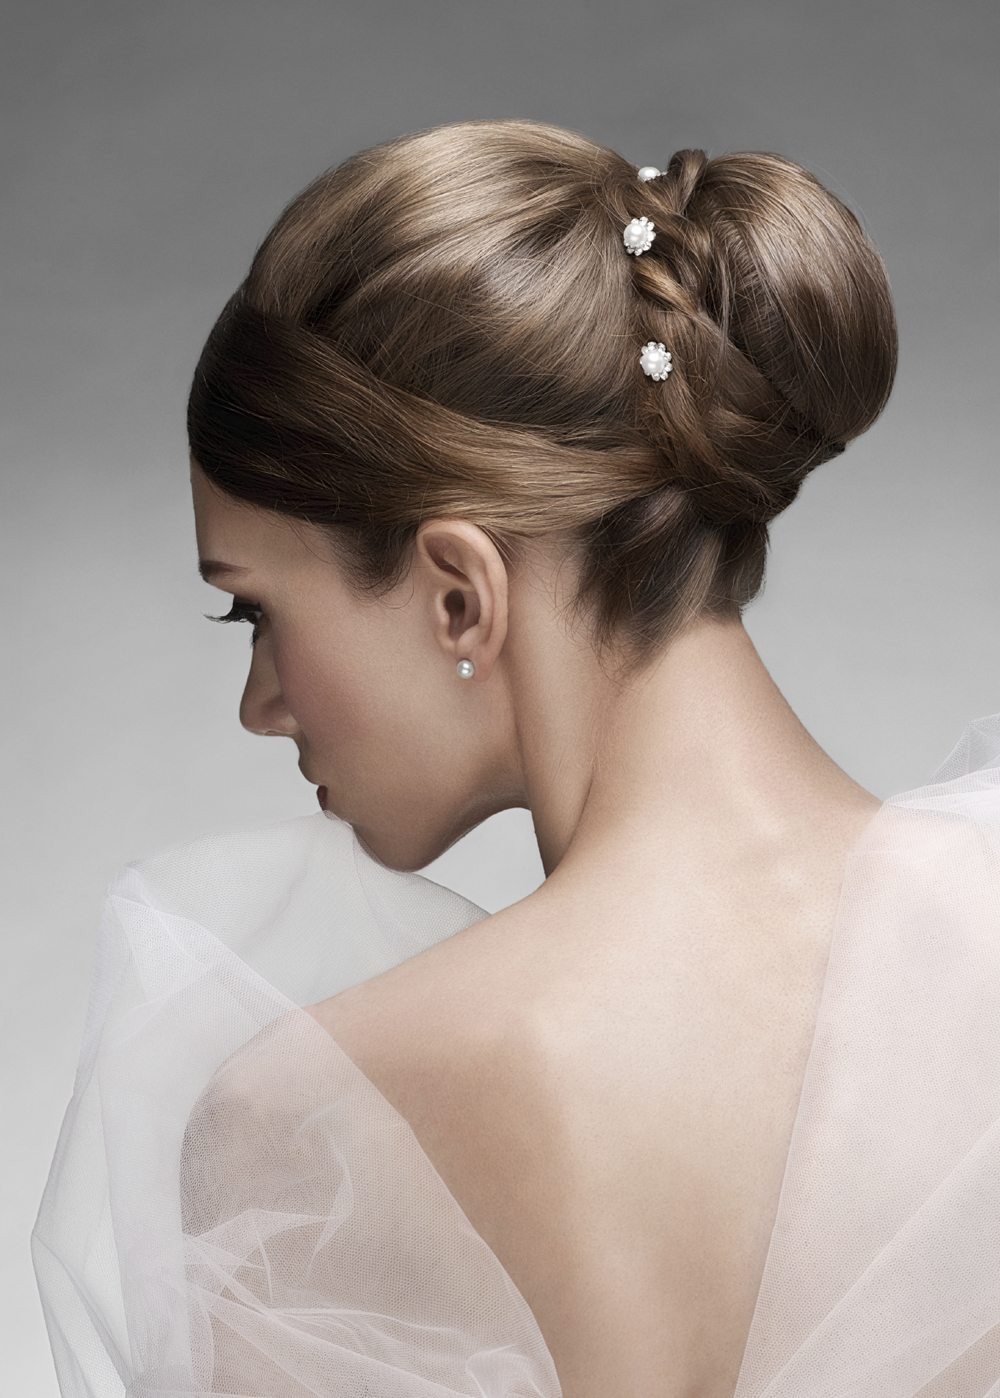 The 20 Best Ideas for Wedding Hairstyles Extensions - Home, Family